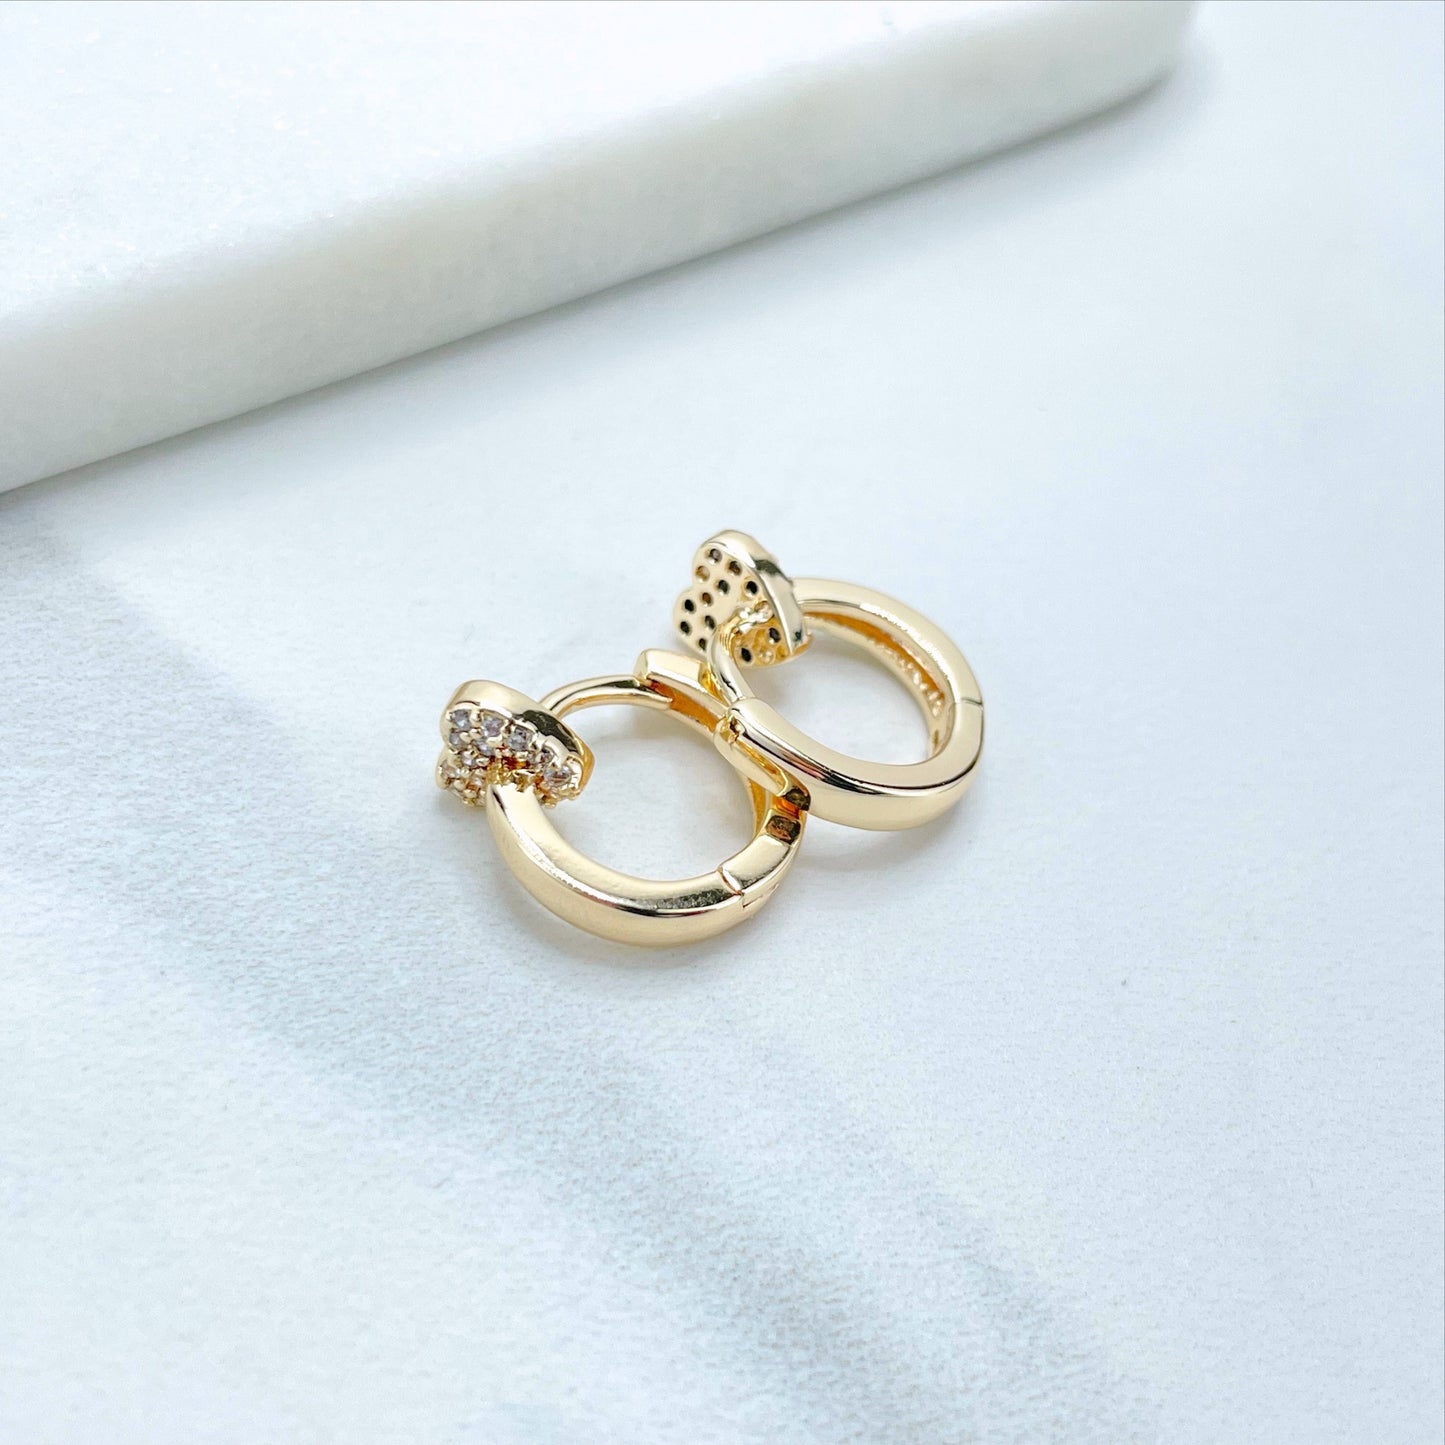 18k Gold Filled 13mm Huggie Earrings with Micro Cubic Zirconia Heart Charm Details, Wholesale Jewelry Making Supplies